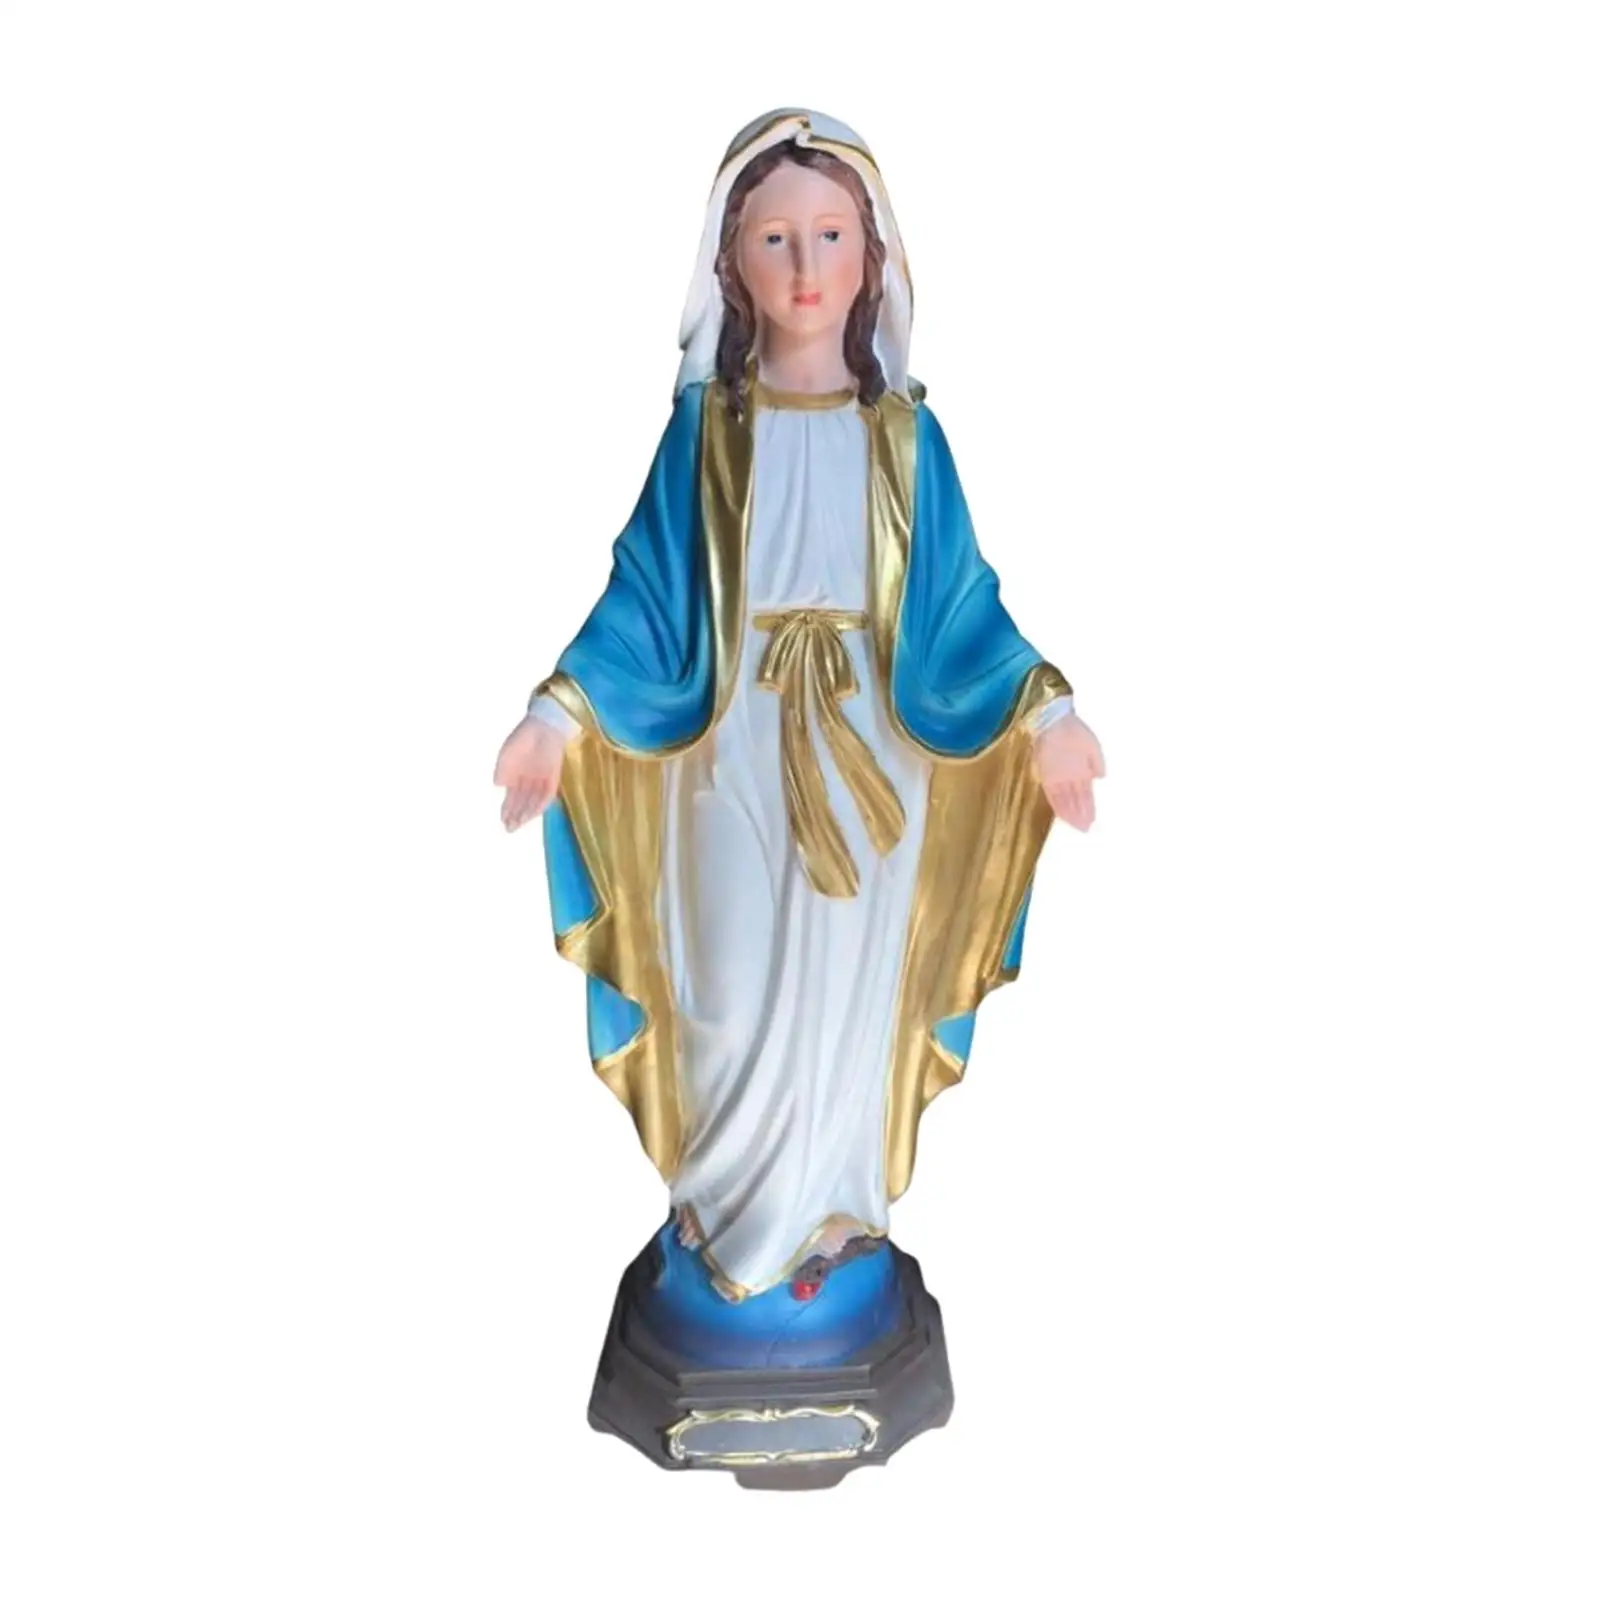 Holy Mother Mary Figurine Character Sculpture Collectable Mother Day Decorations